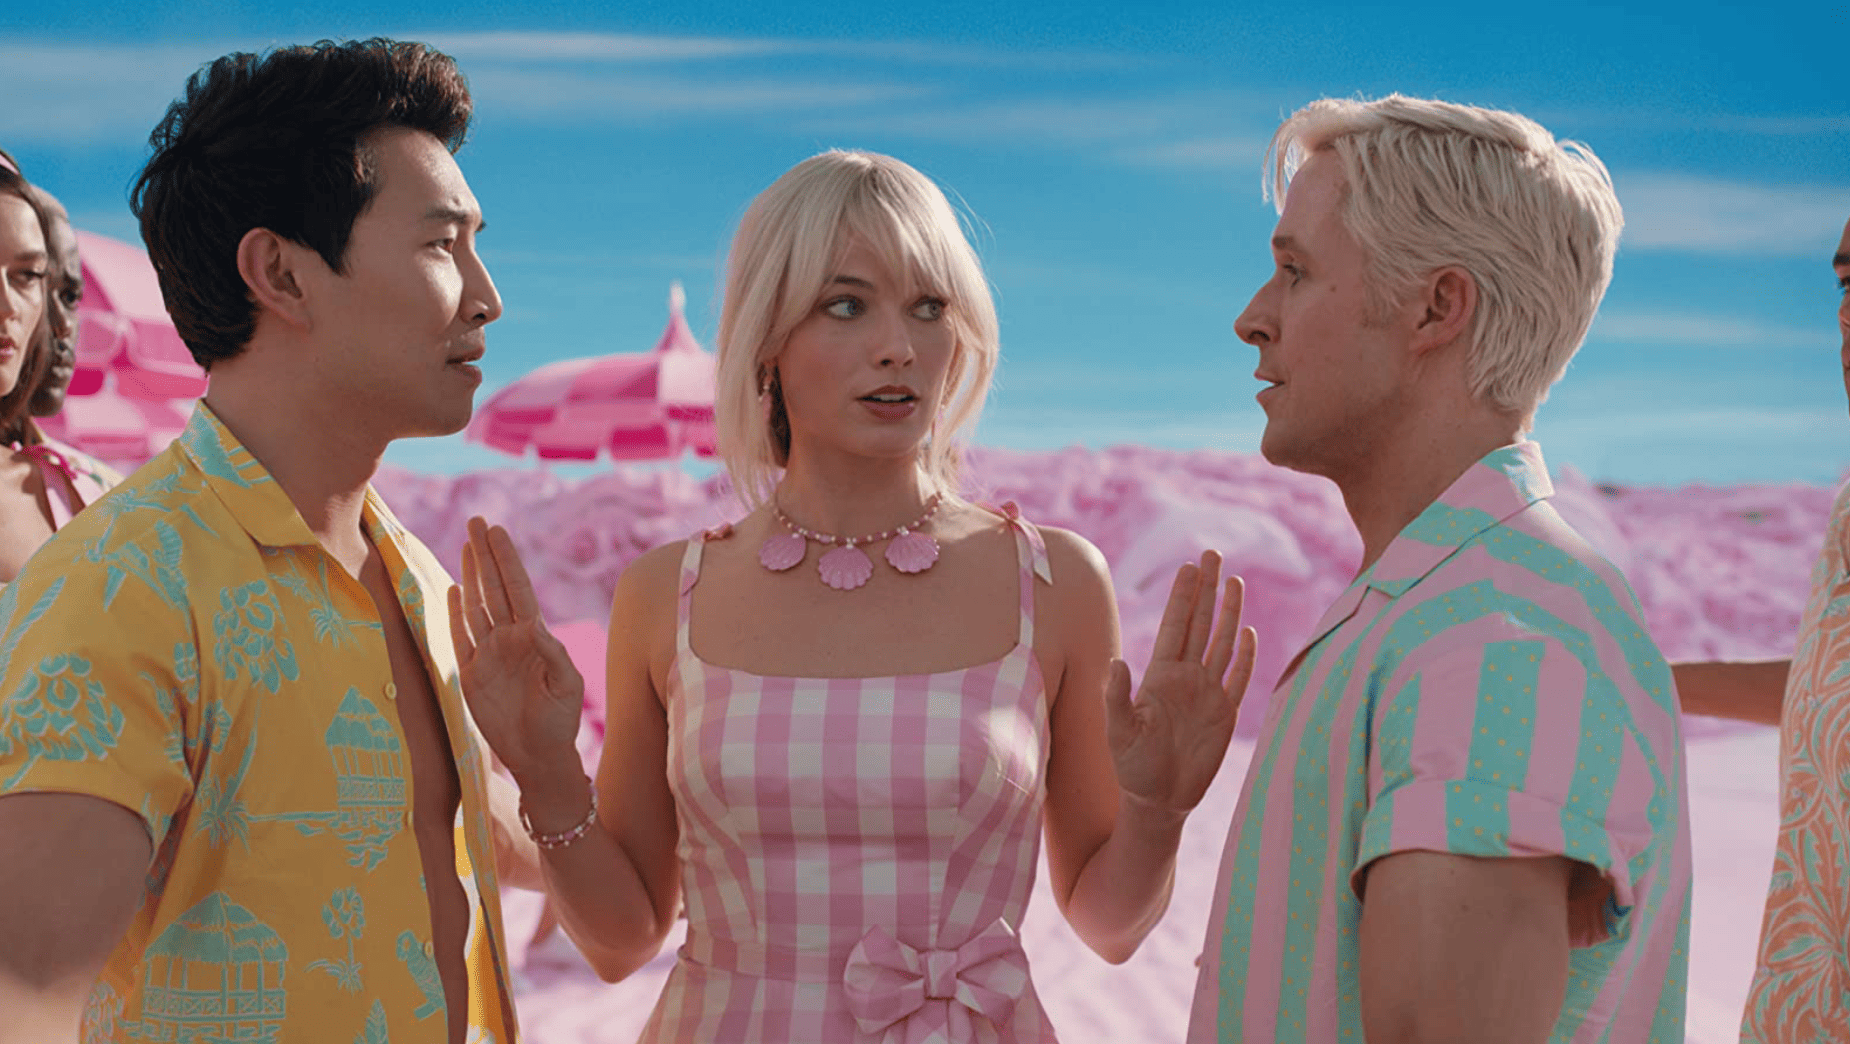 Simu Liu and Ryan Gosling both as Ken facing off against each other and Margot Robbie as Barbie in the middle separating the two with her palms in this image from HeyDay Films